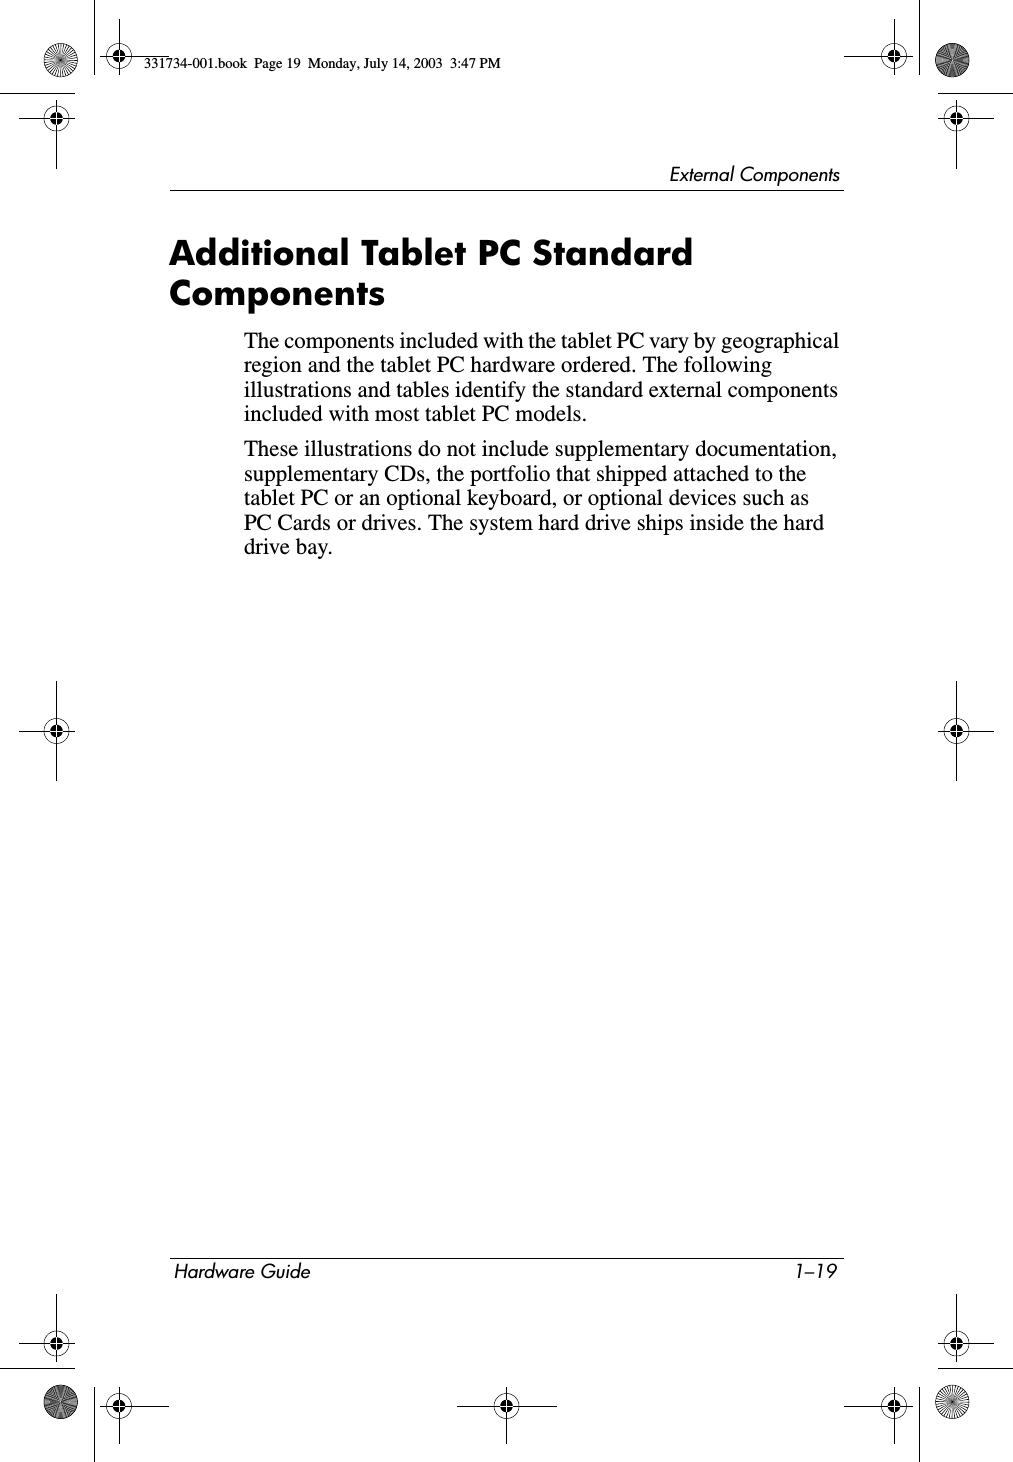 External ComponentsHardware Guide 1–19Additional Tablet PC Standard ComponentsThe components included with the tablet PC vary by geographical region and the tablet PC hardware ordered. The following illustrations and tables identify the standard external components included with most tablet PC models.These illustrations do not include supplementary documentation, supplementary CDs, the portfolio that shipped attached to the tablet PC or an optional keyboard, or optional devices such as PC Cards or drives. The system hard drive ships inside the hard drive bay.331734-001.book  Page 19  Monday, July 14, 2003  3:47 PM